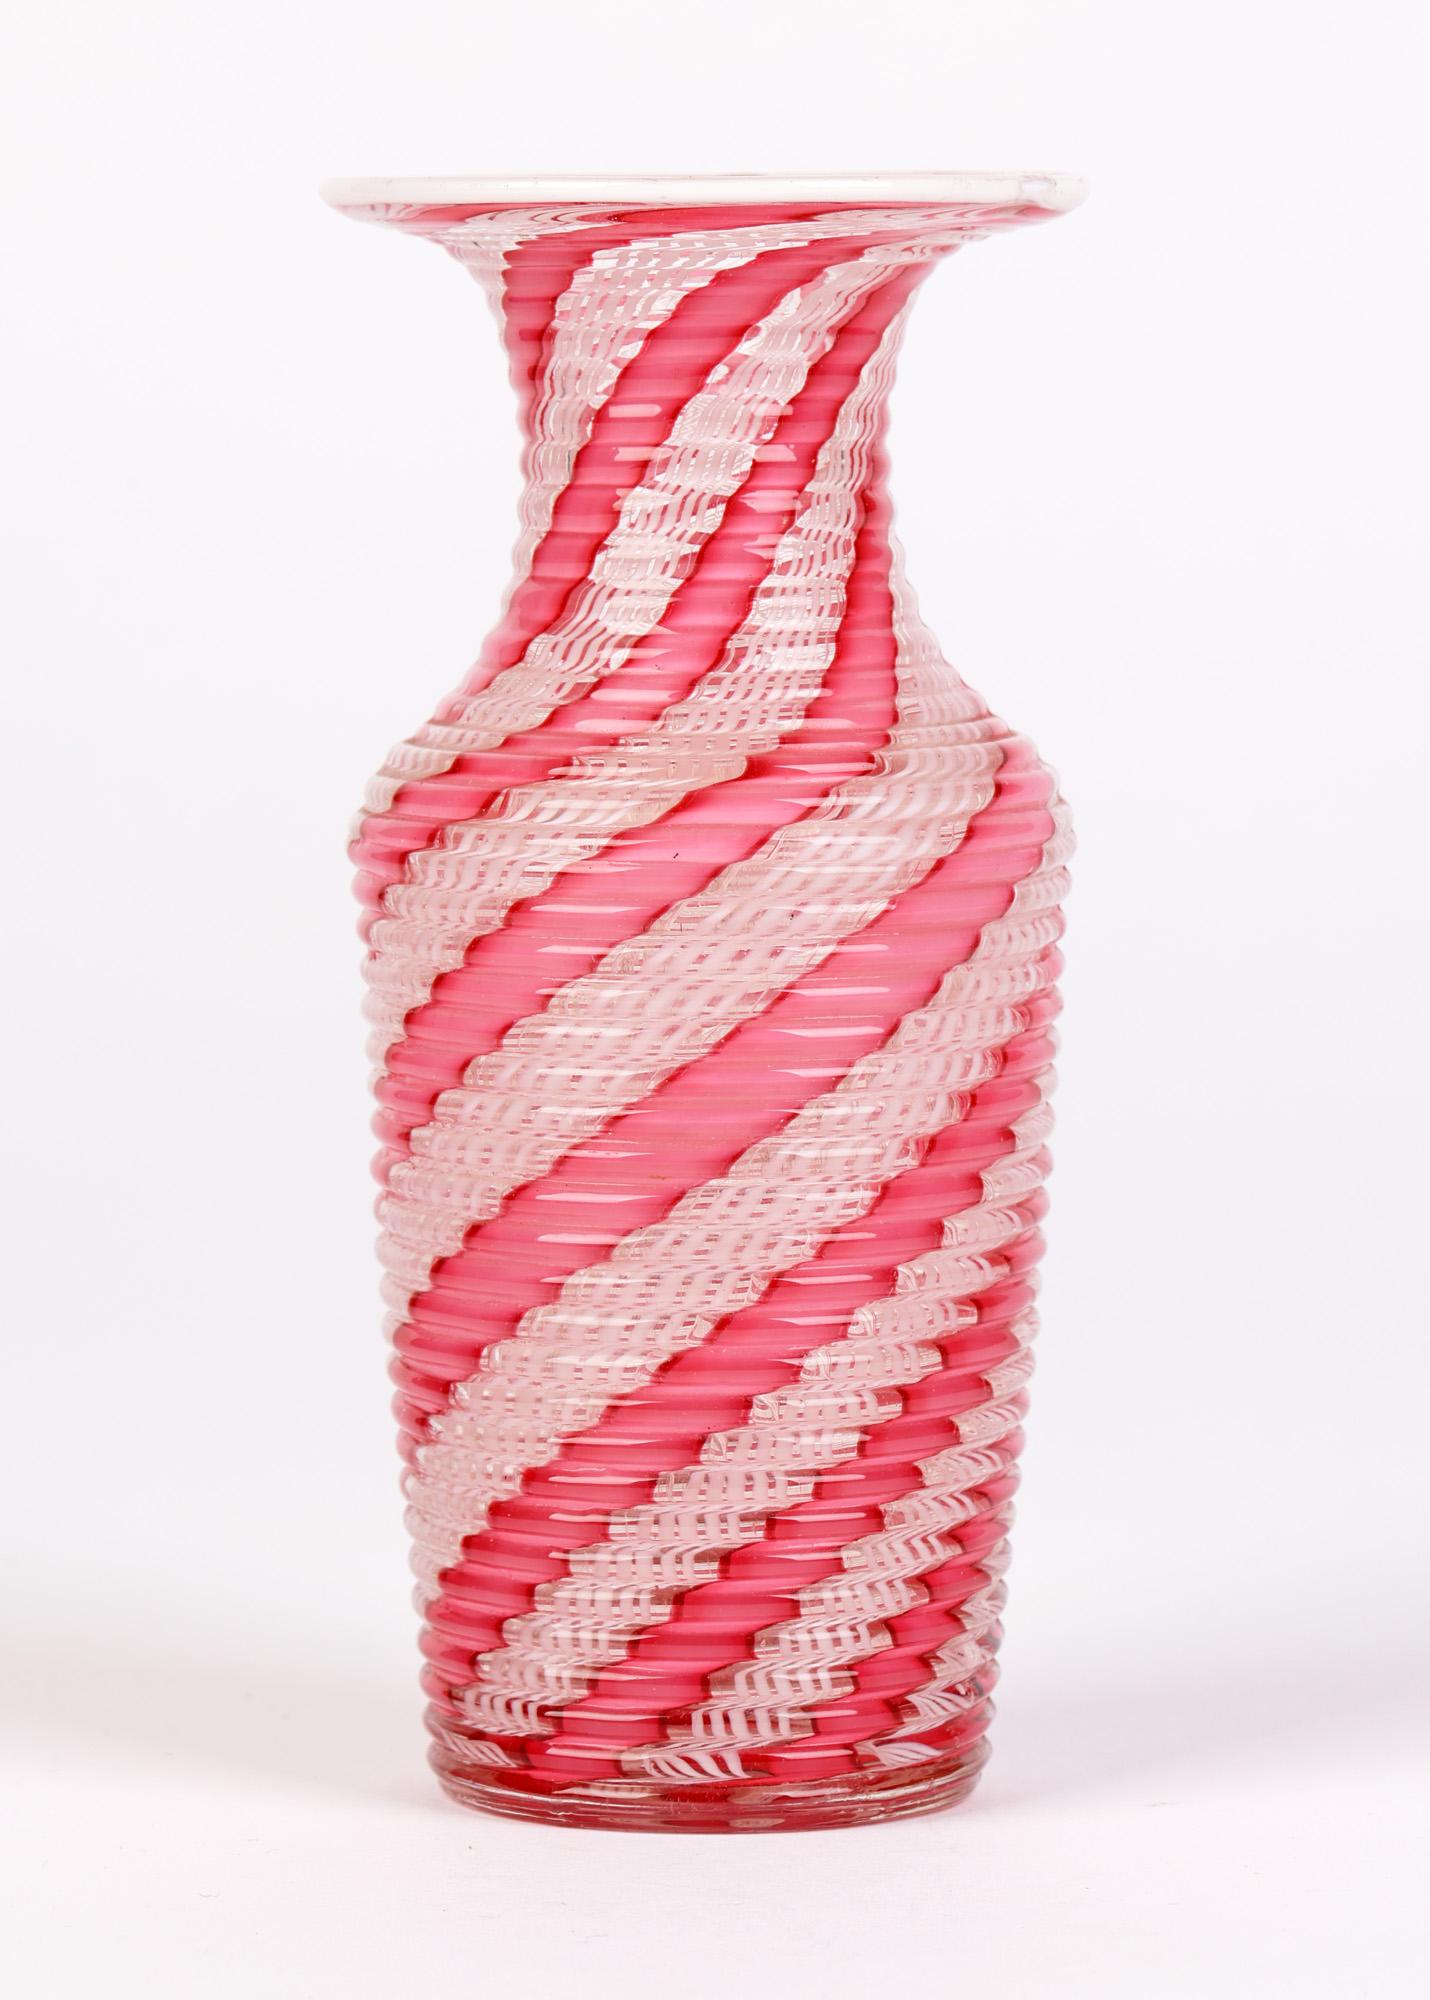 Clichy French Latticinio Pink Ribbon Patterned Glass Vase For Sale 6